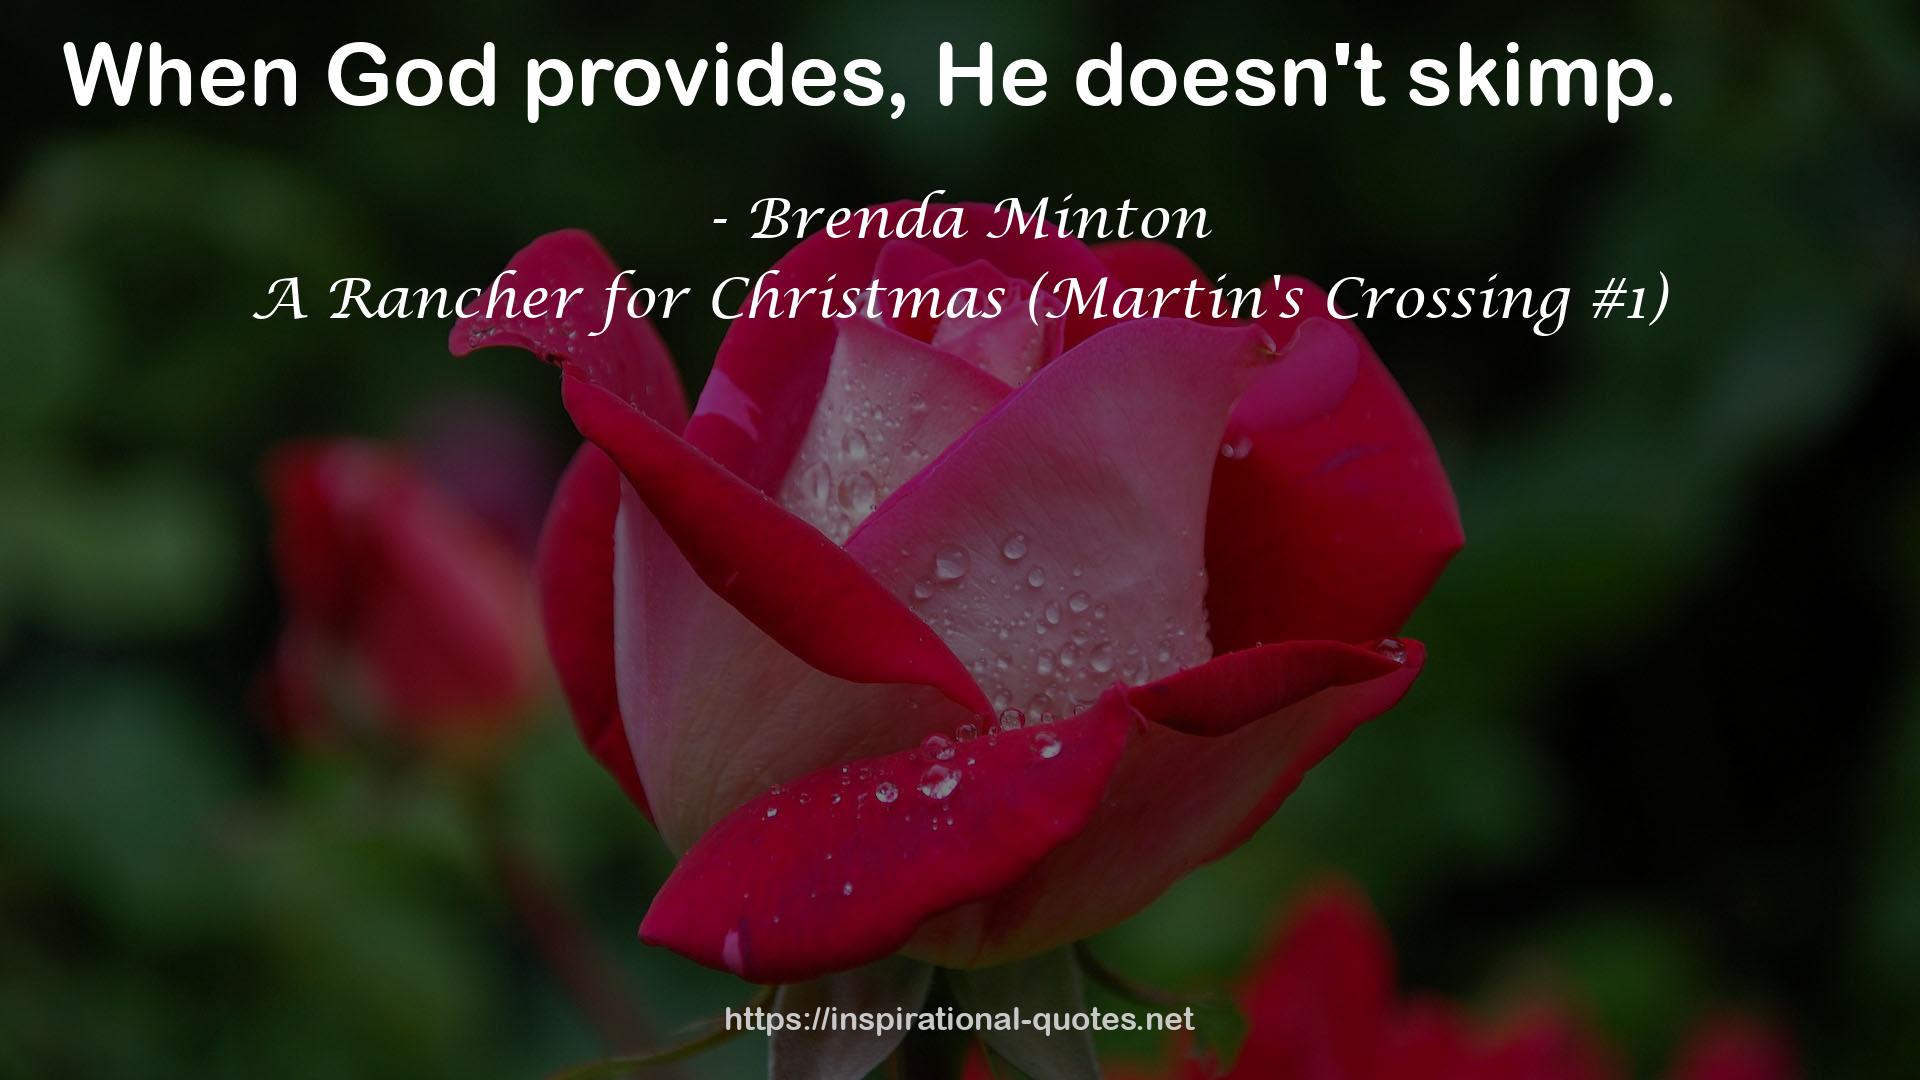 A Rancher for Christmas (Martin's Crossing #1) QUOTES